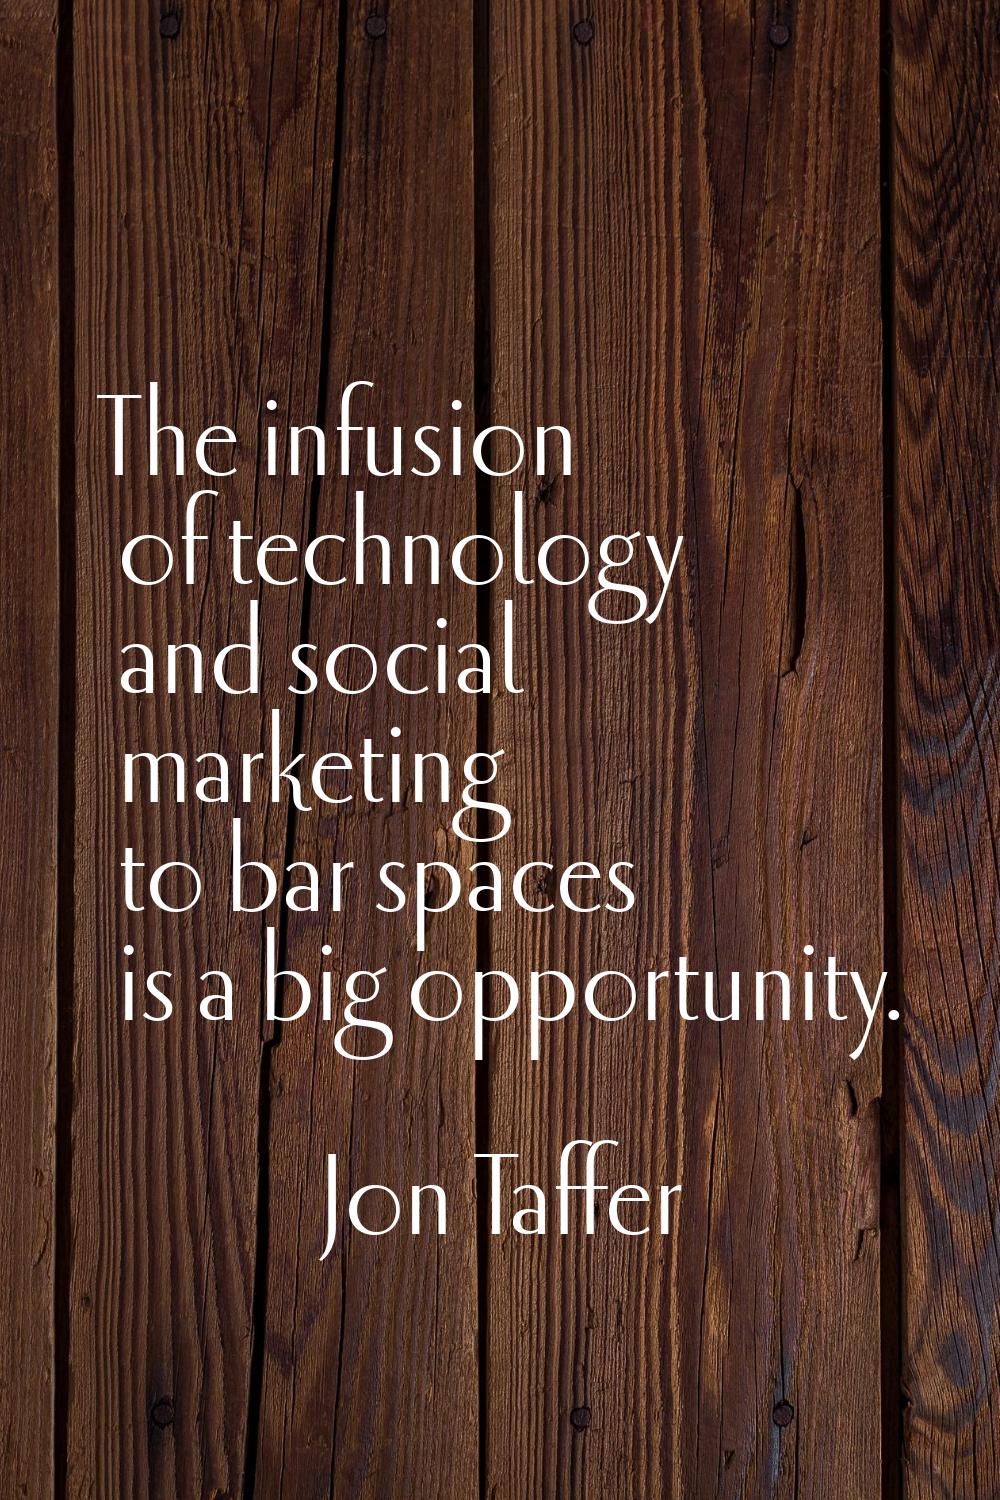 The infusion of technology and social marketing to bar spaces is a big opportunity.